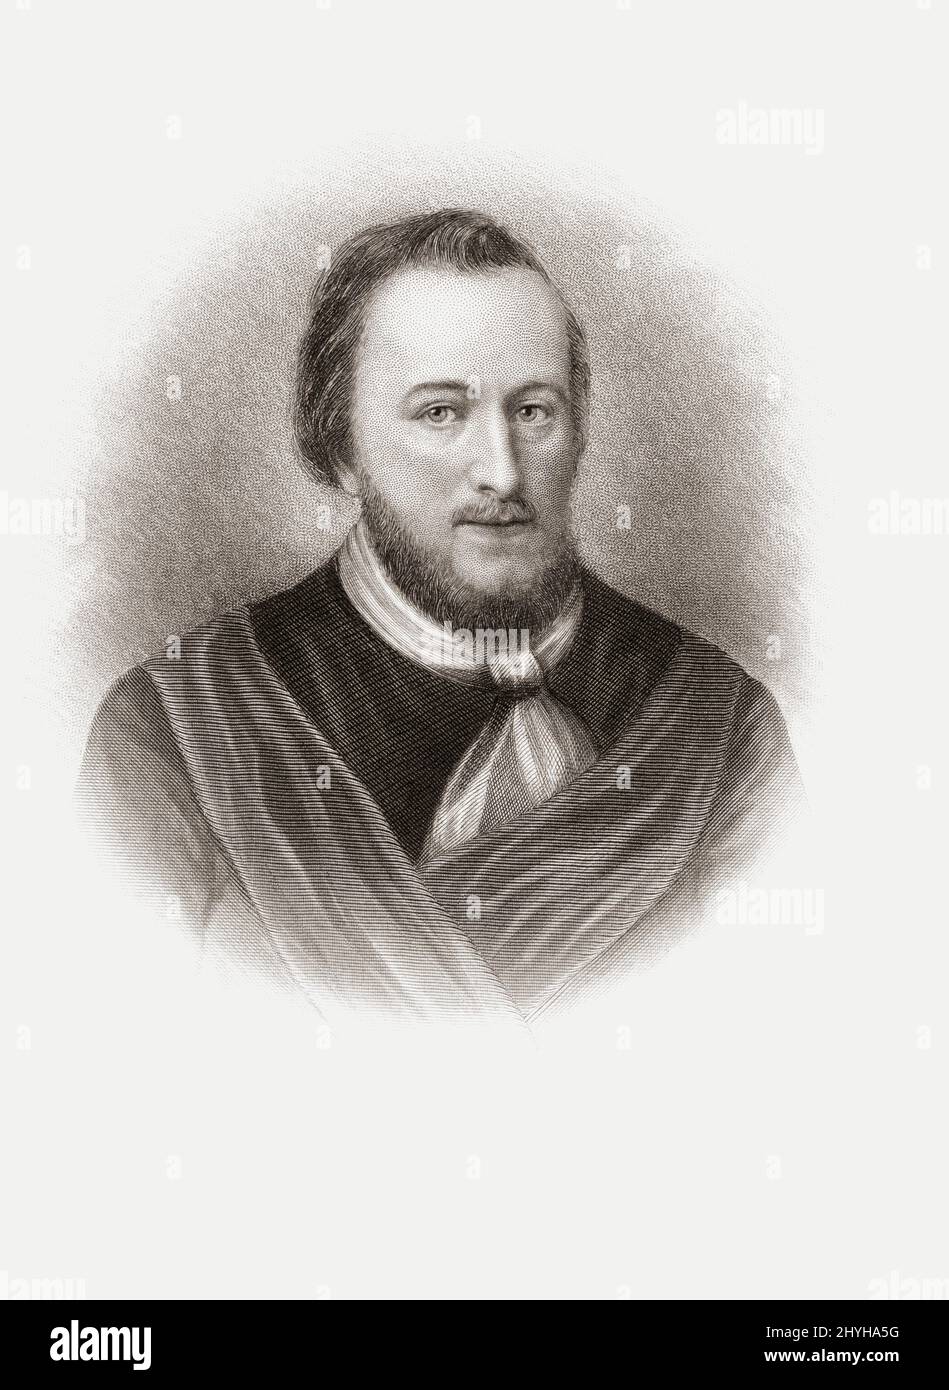 Thomas West, 3rd Baron De La Warr, 1577 – 1618.  Oxford educated English merchant and politician who became first governor of Virginia.  A contraction of his title - to Delaware - subsequently became the name of a Native American people, a state, a bay and a river.  After a contemporary portrait. Stock Photo